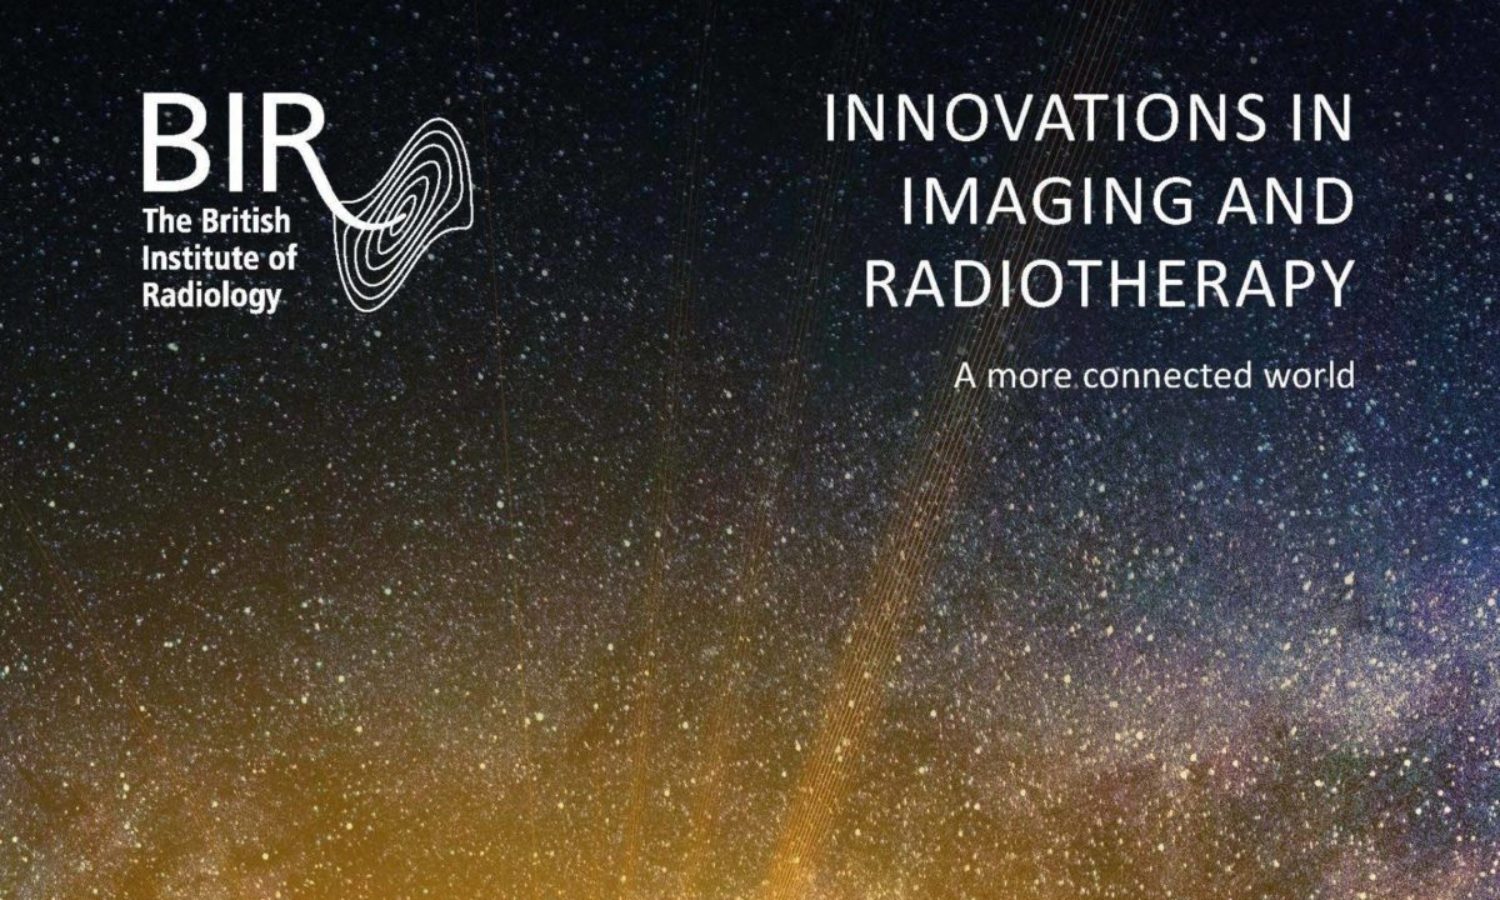 The Quest for Innovation: Addressing the Latest Trends in Imaging and Radiotherapy